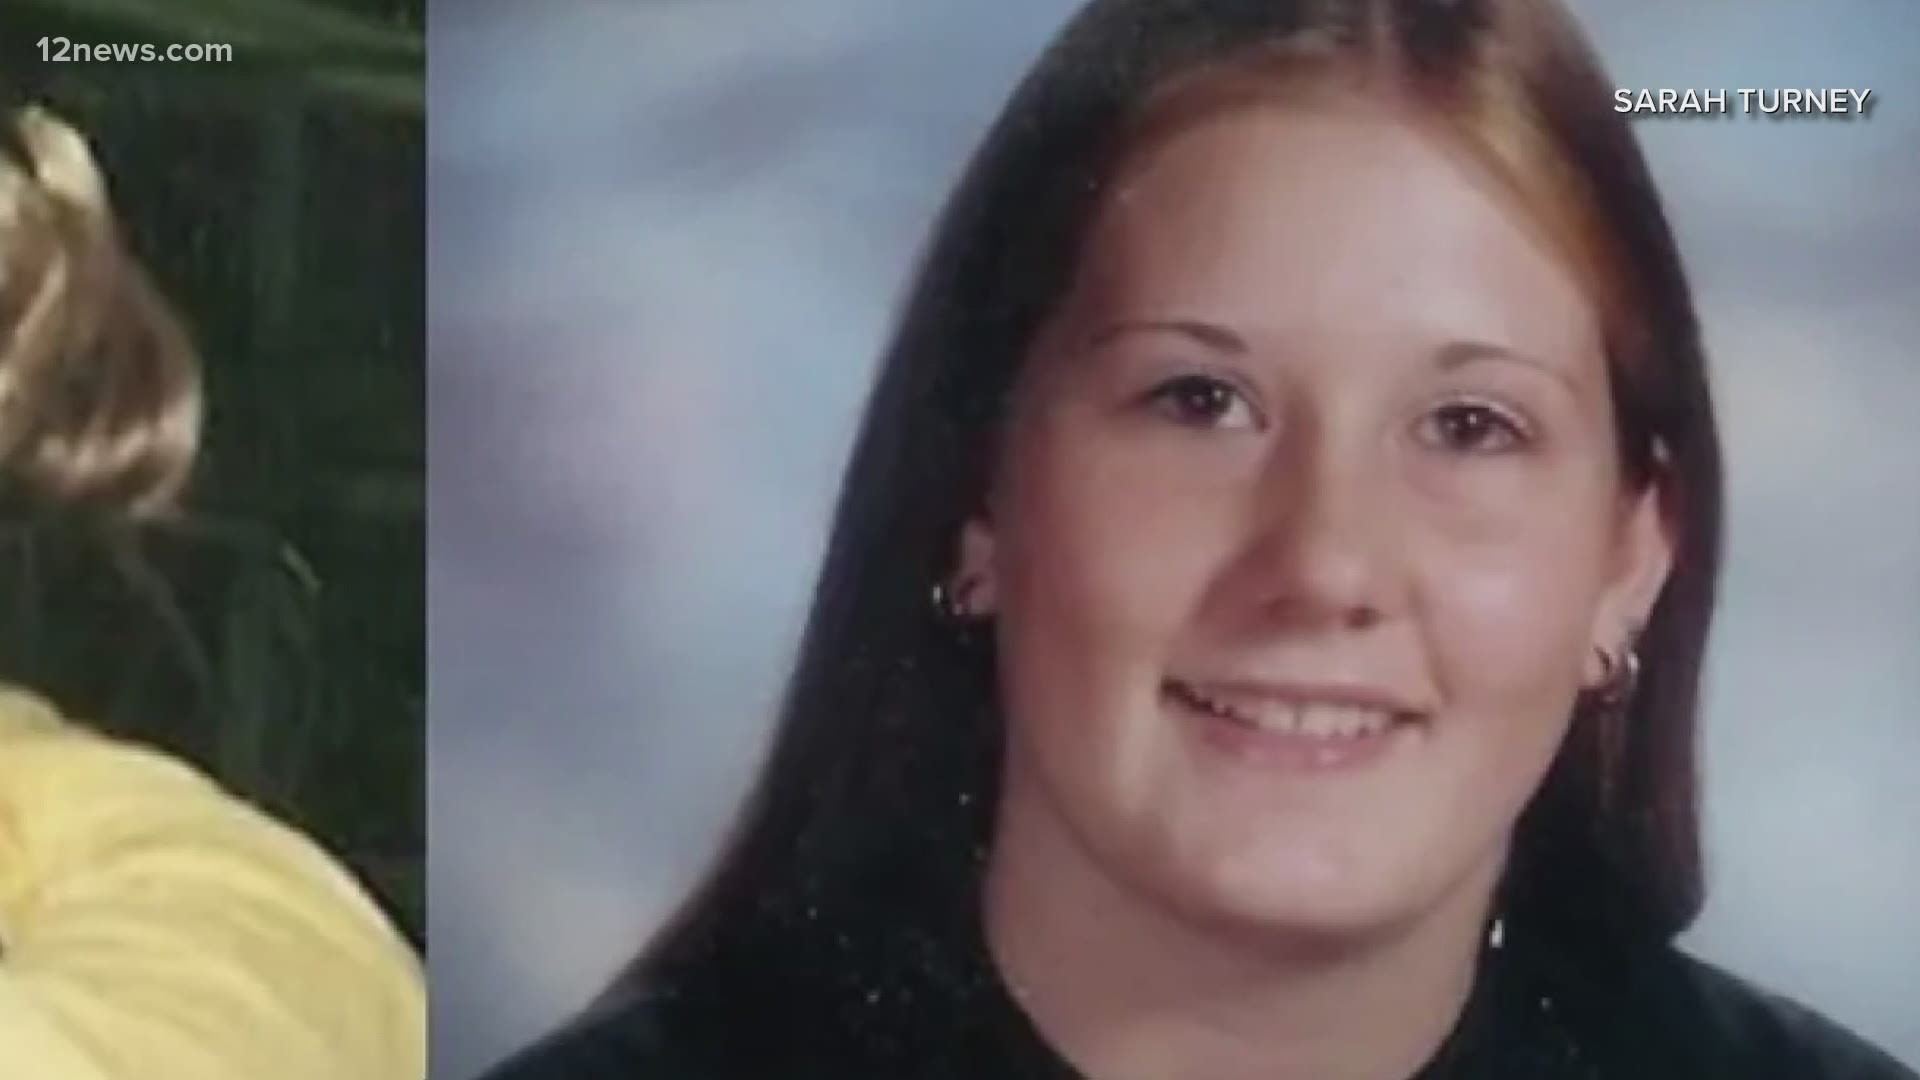 The then 17-year-old girl went missing from a north Phoenix neighborhood in May 2001.